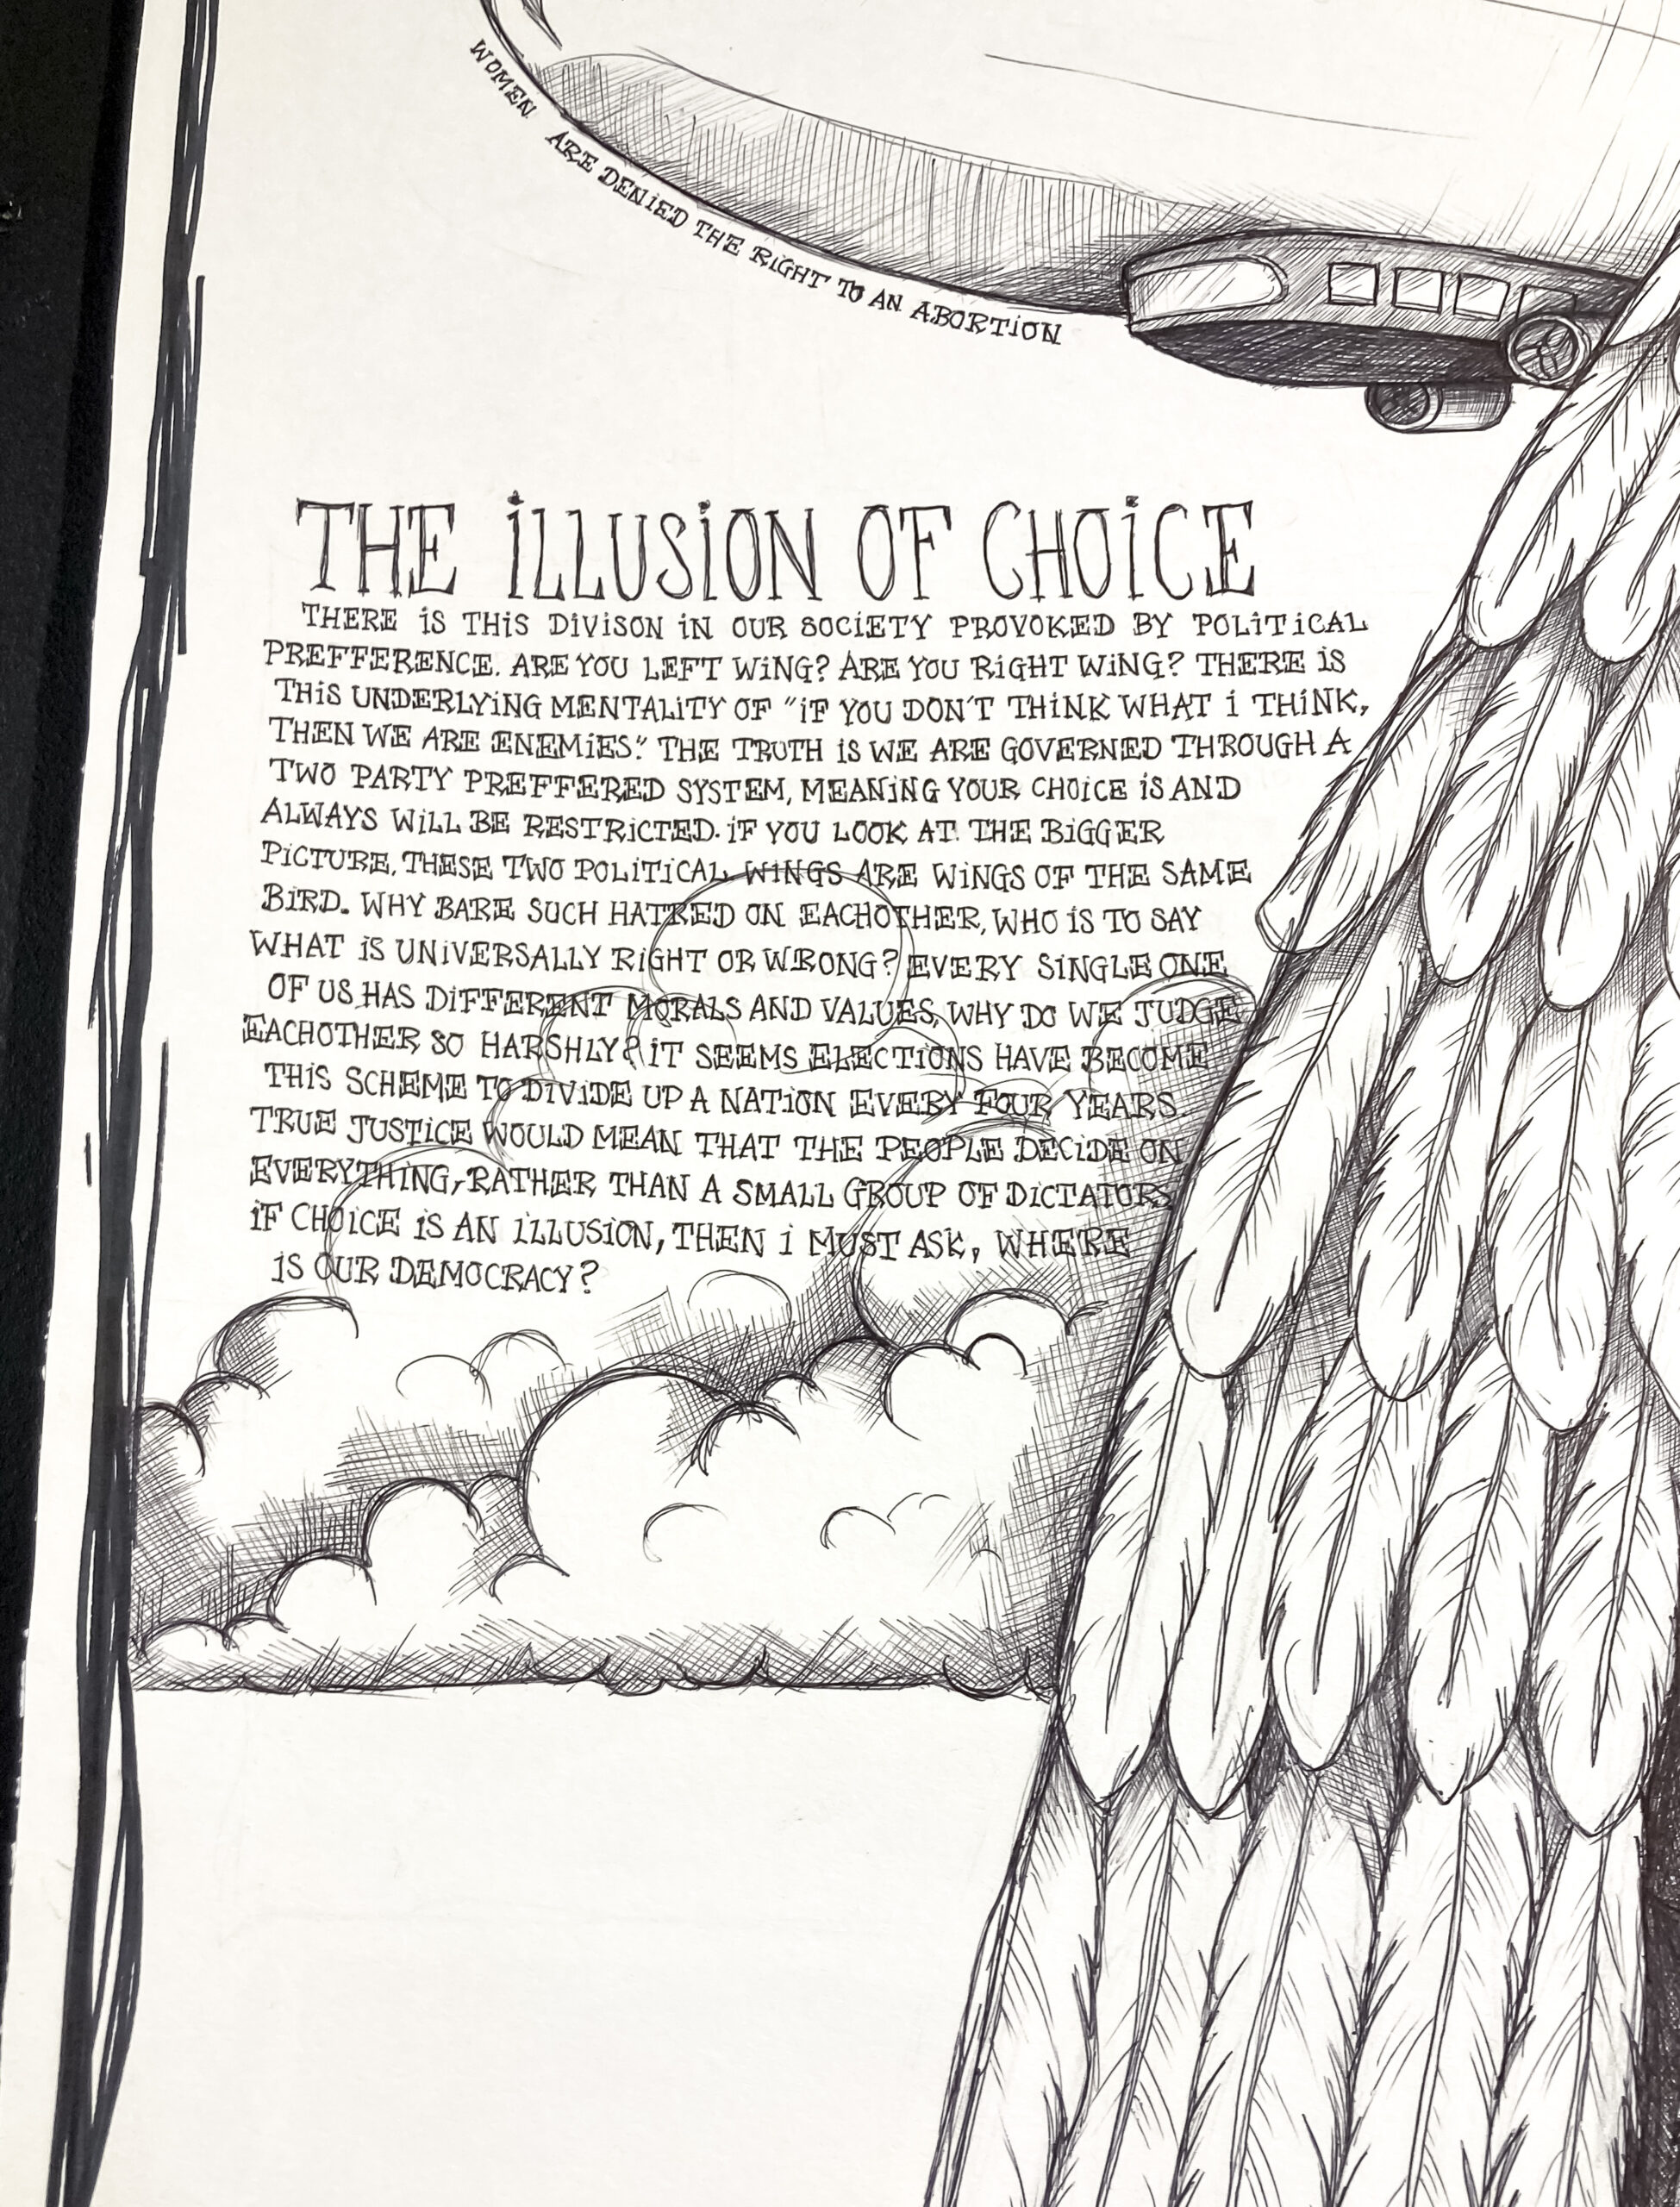 detail of a drawing titled "The Illusion of Choice" containing text about choosing who to vote for There are feathers and clouds in the image